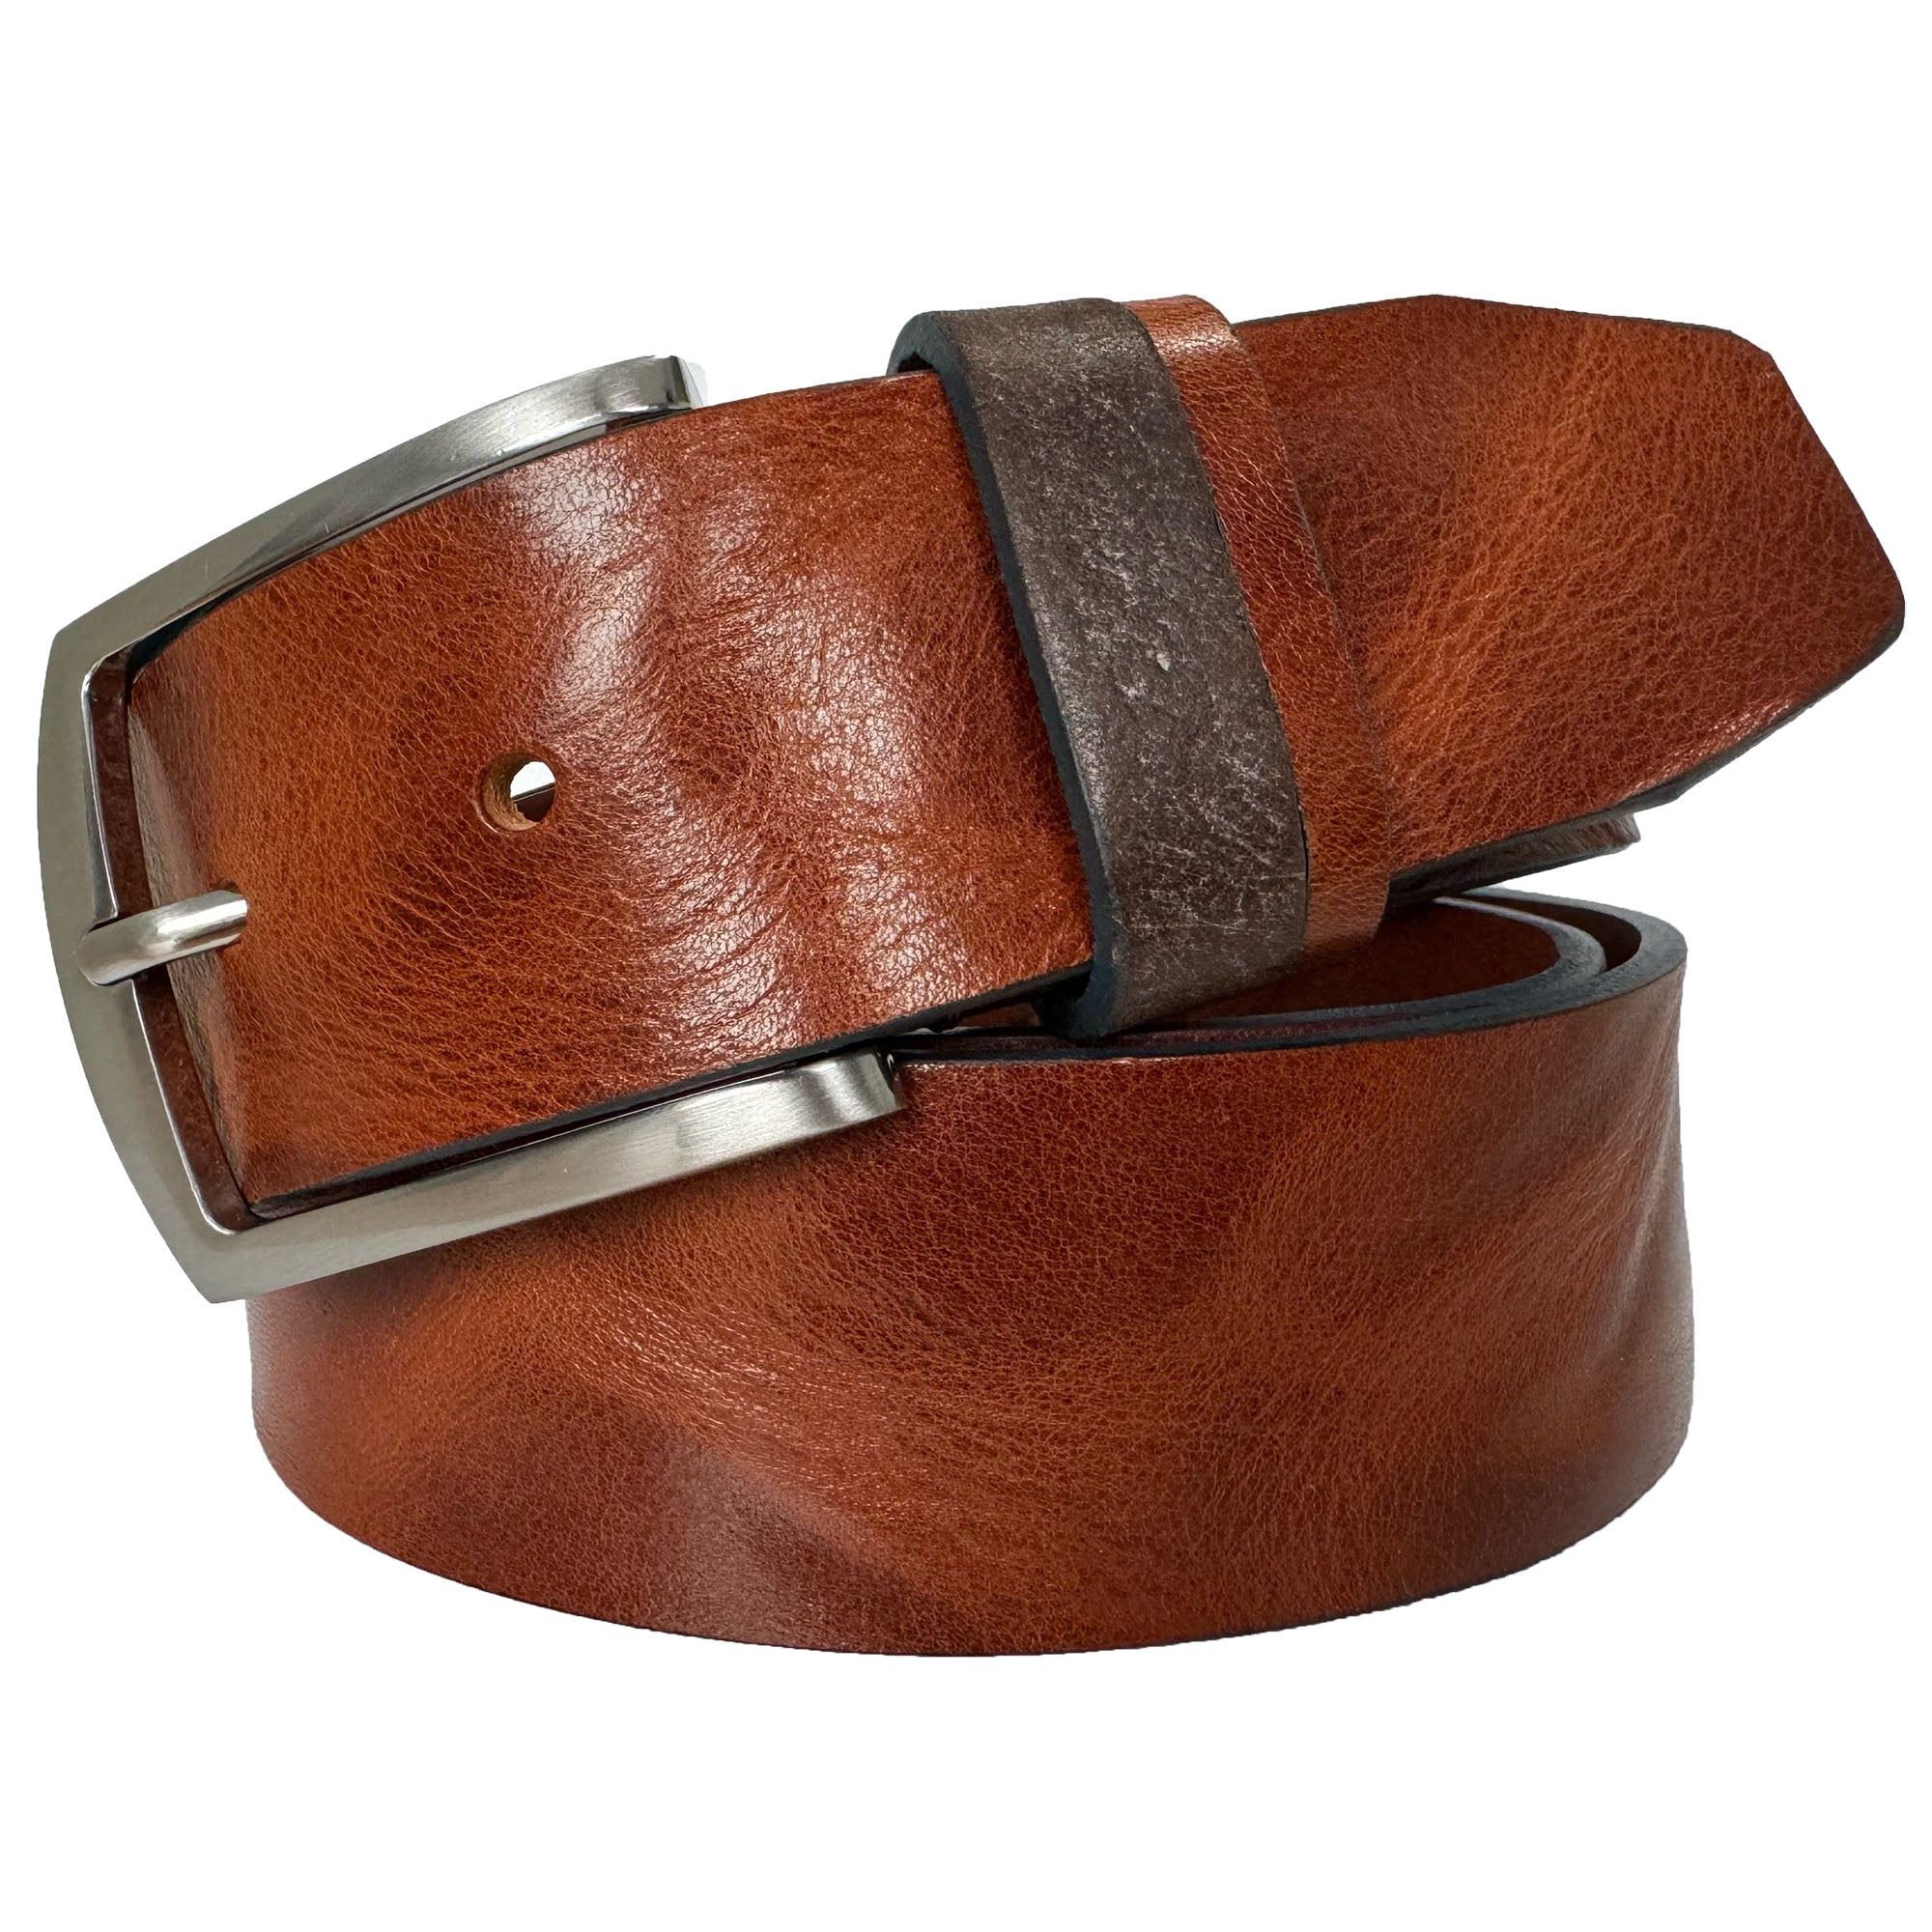 TAN DISTRESSED HIDE WITH CONTRAST LOOP 40MM LEATHER BELT